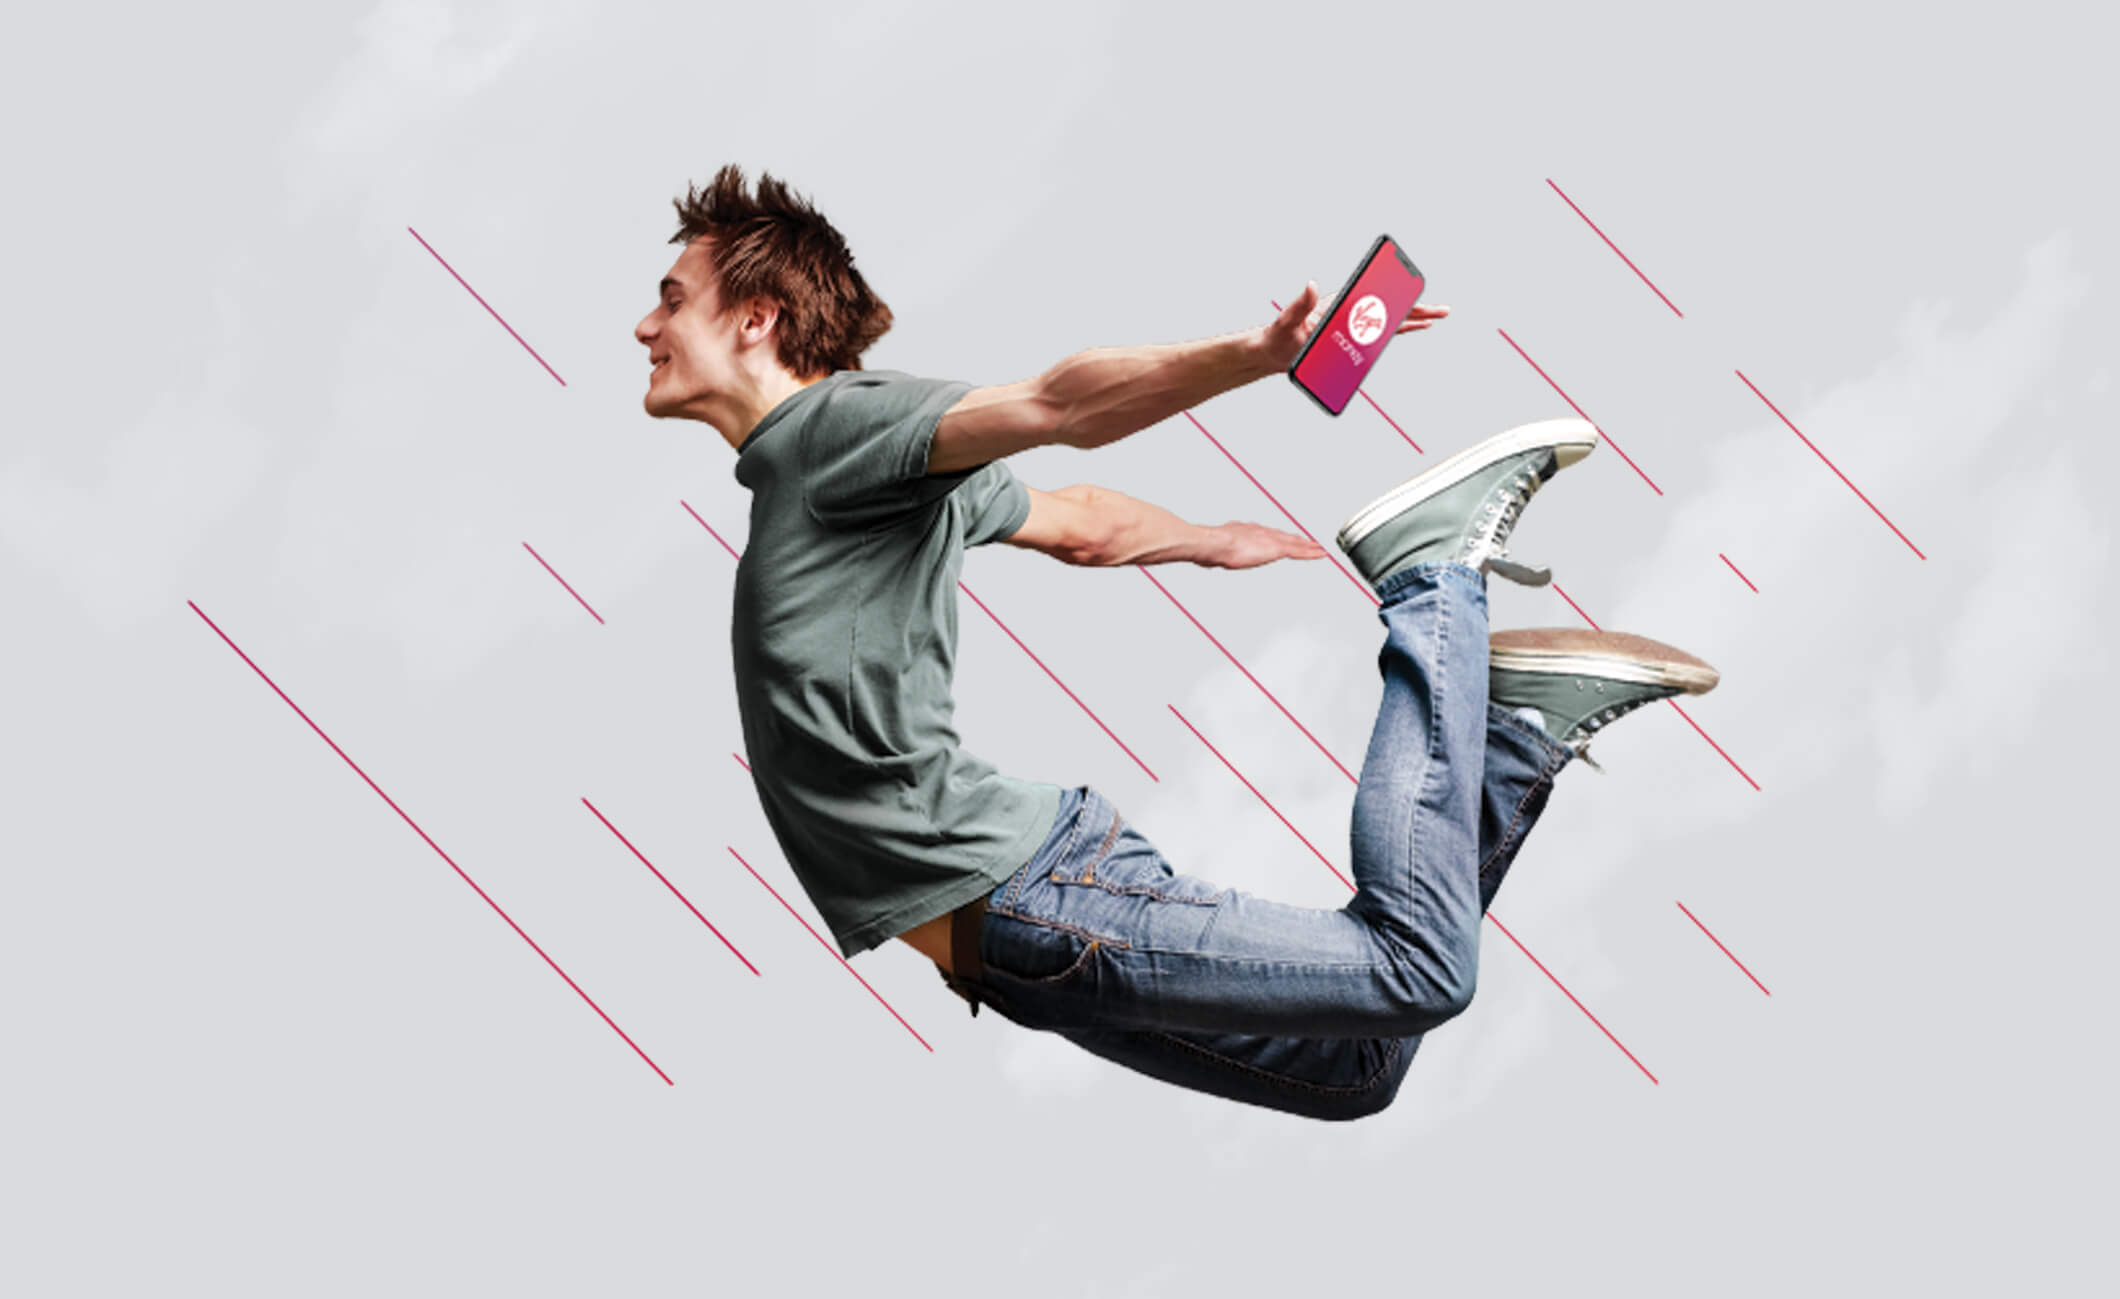 Man leaping through the air holding phone with Virgin Money app on screen